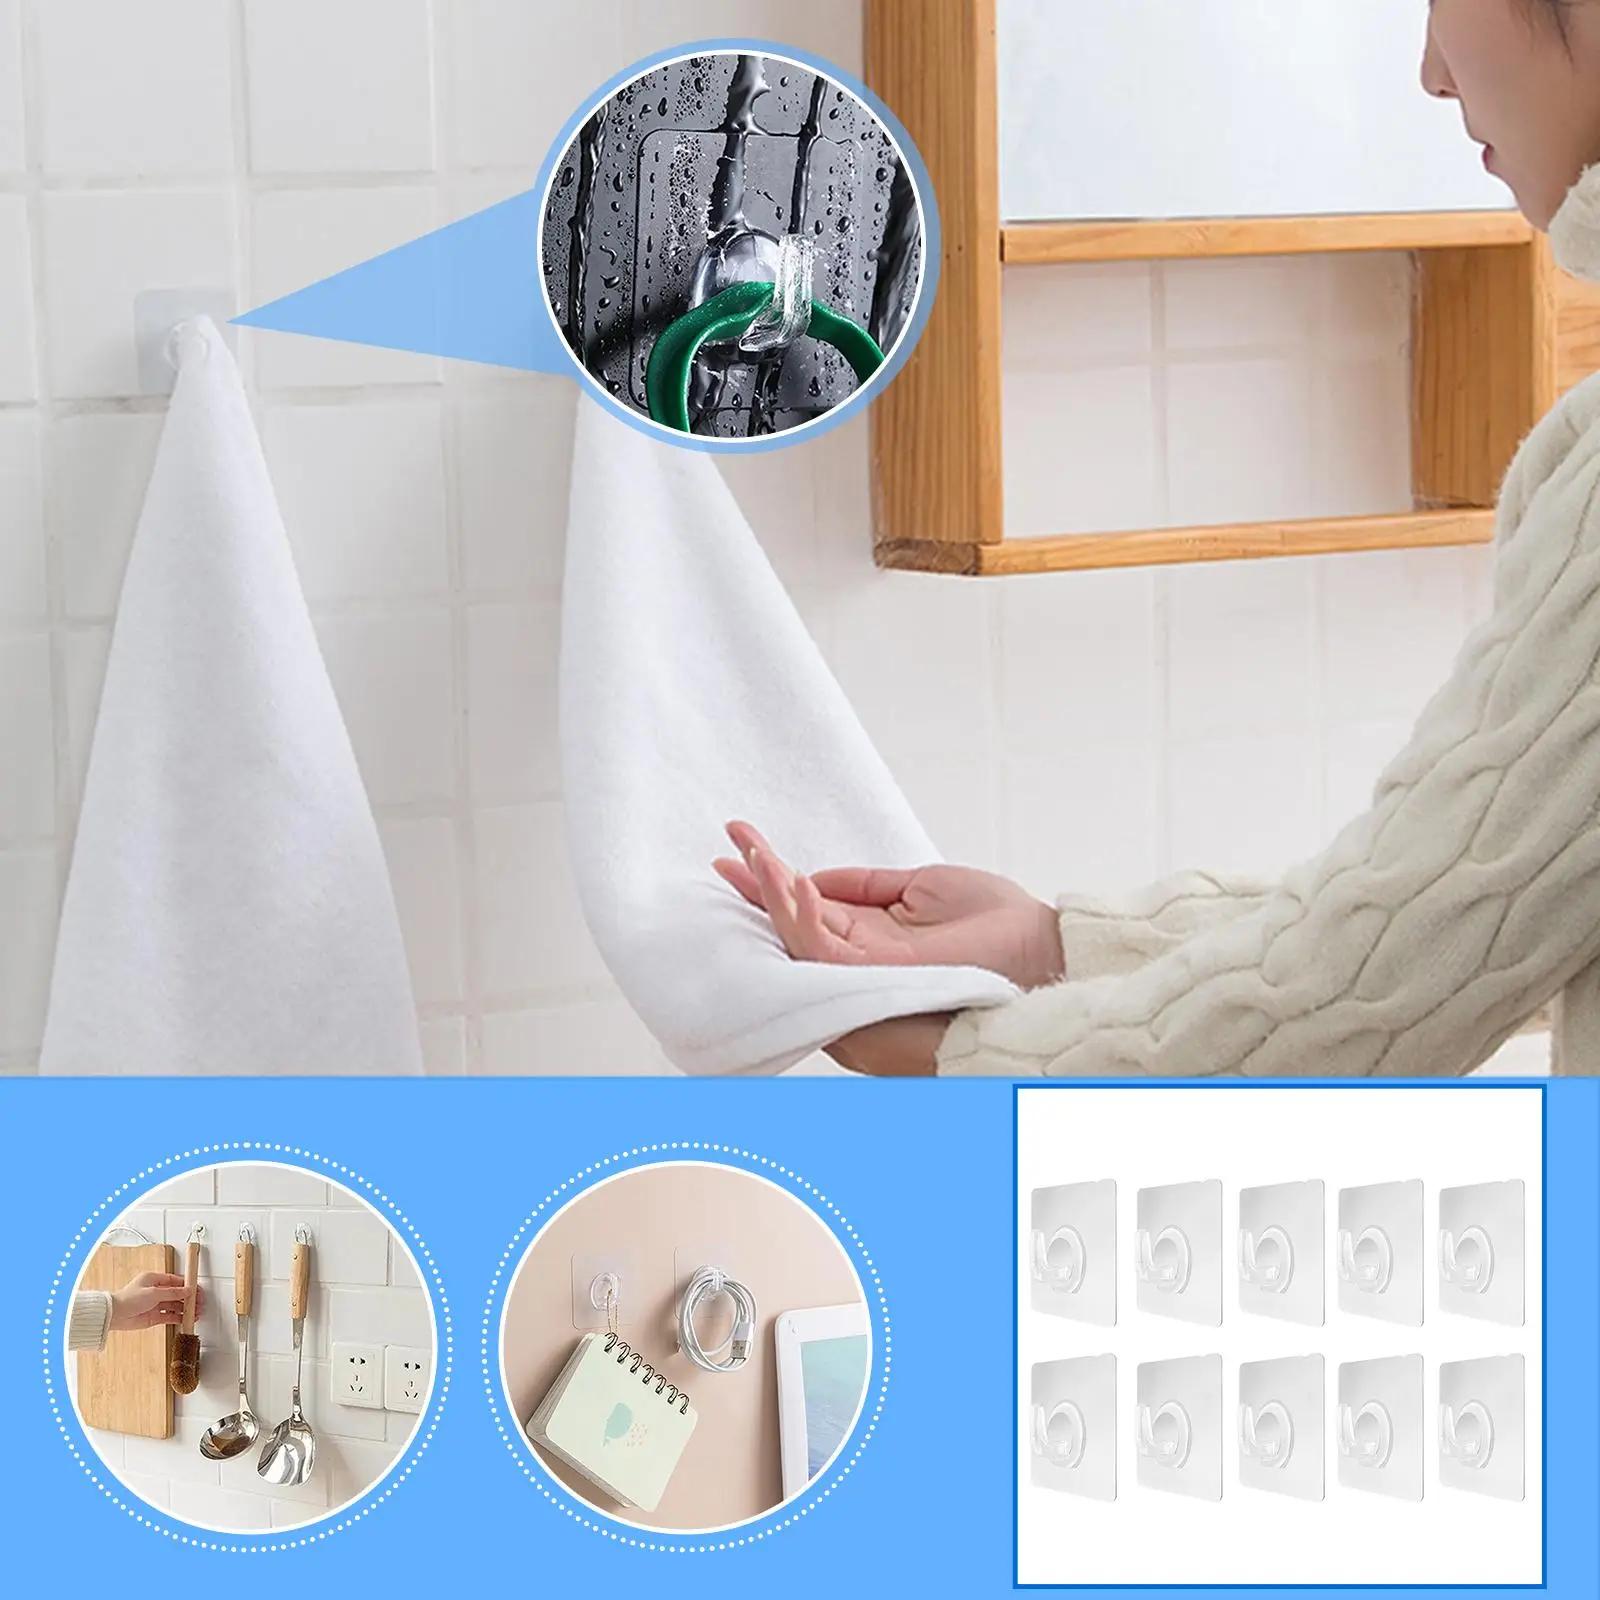 

10pcs Strong Mark Hook Transparent Plastic Self Adhesive Heavy Duty Wall Seamless Hook For Kitchen Bathroom Organizers X4W4